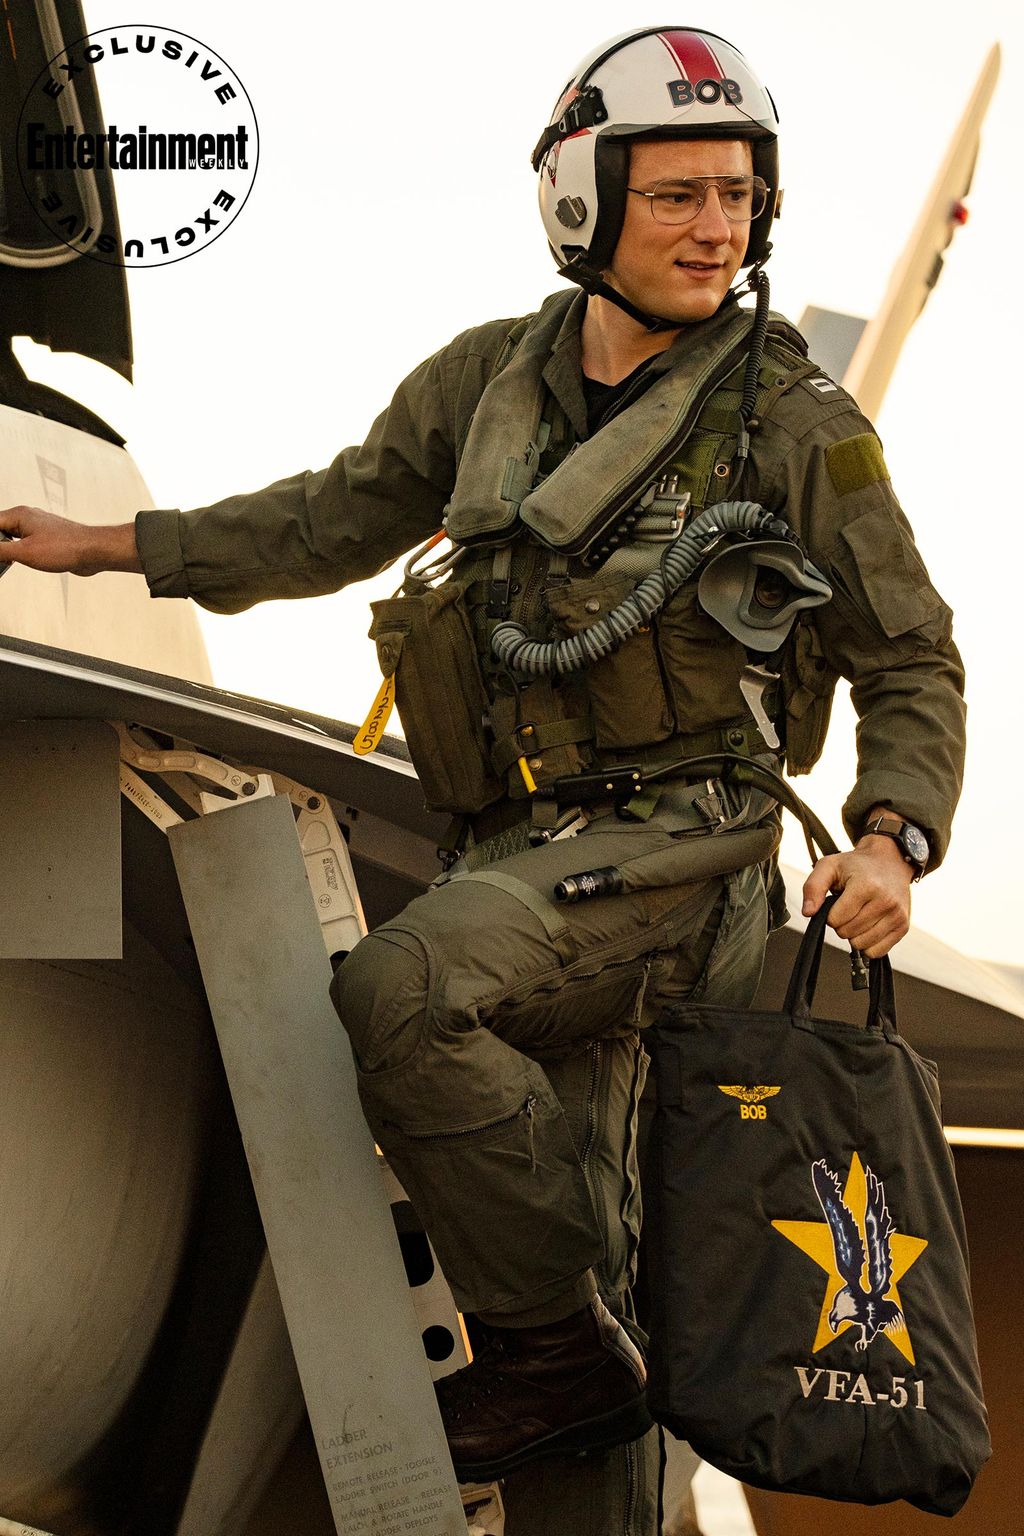 Lewis Pullman plays "BOB" in Top Gun: Maverick from Paramount Pictures, Skydance and Jerry Bruckheimer Films. 